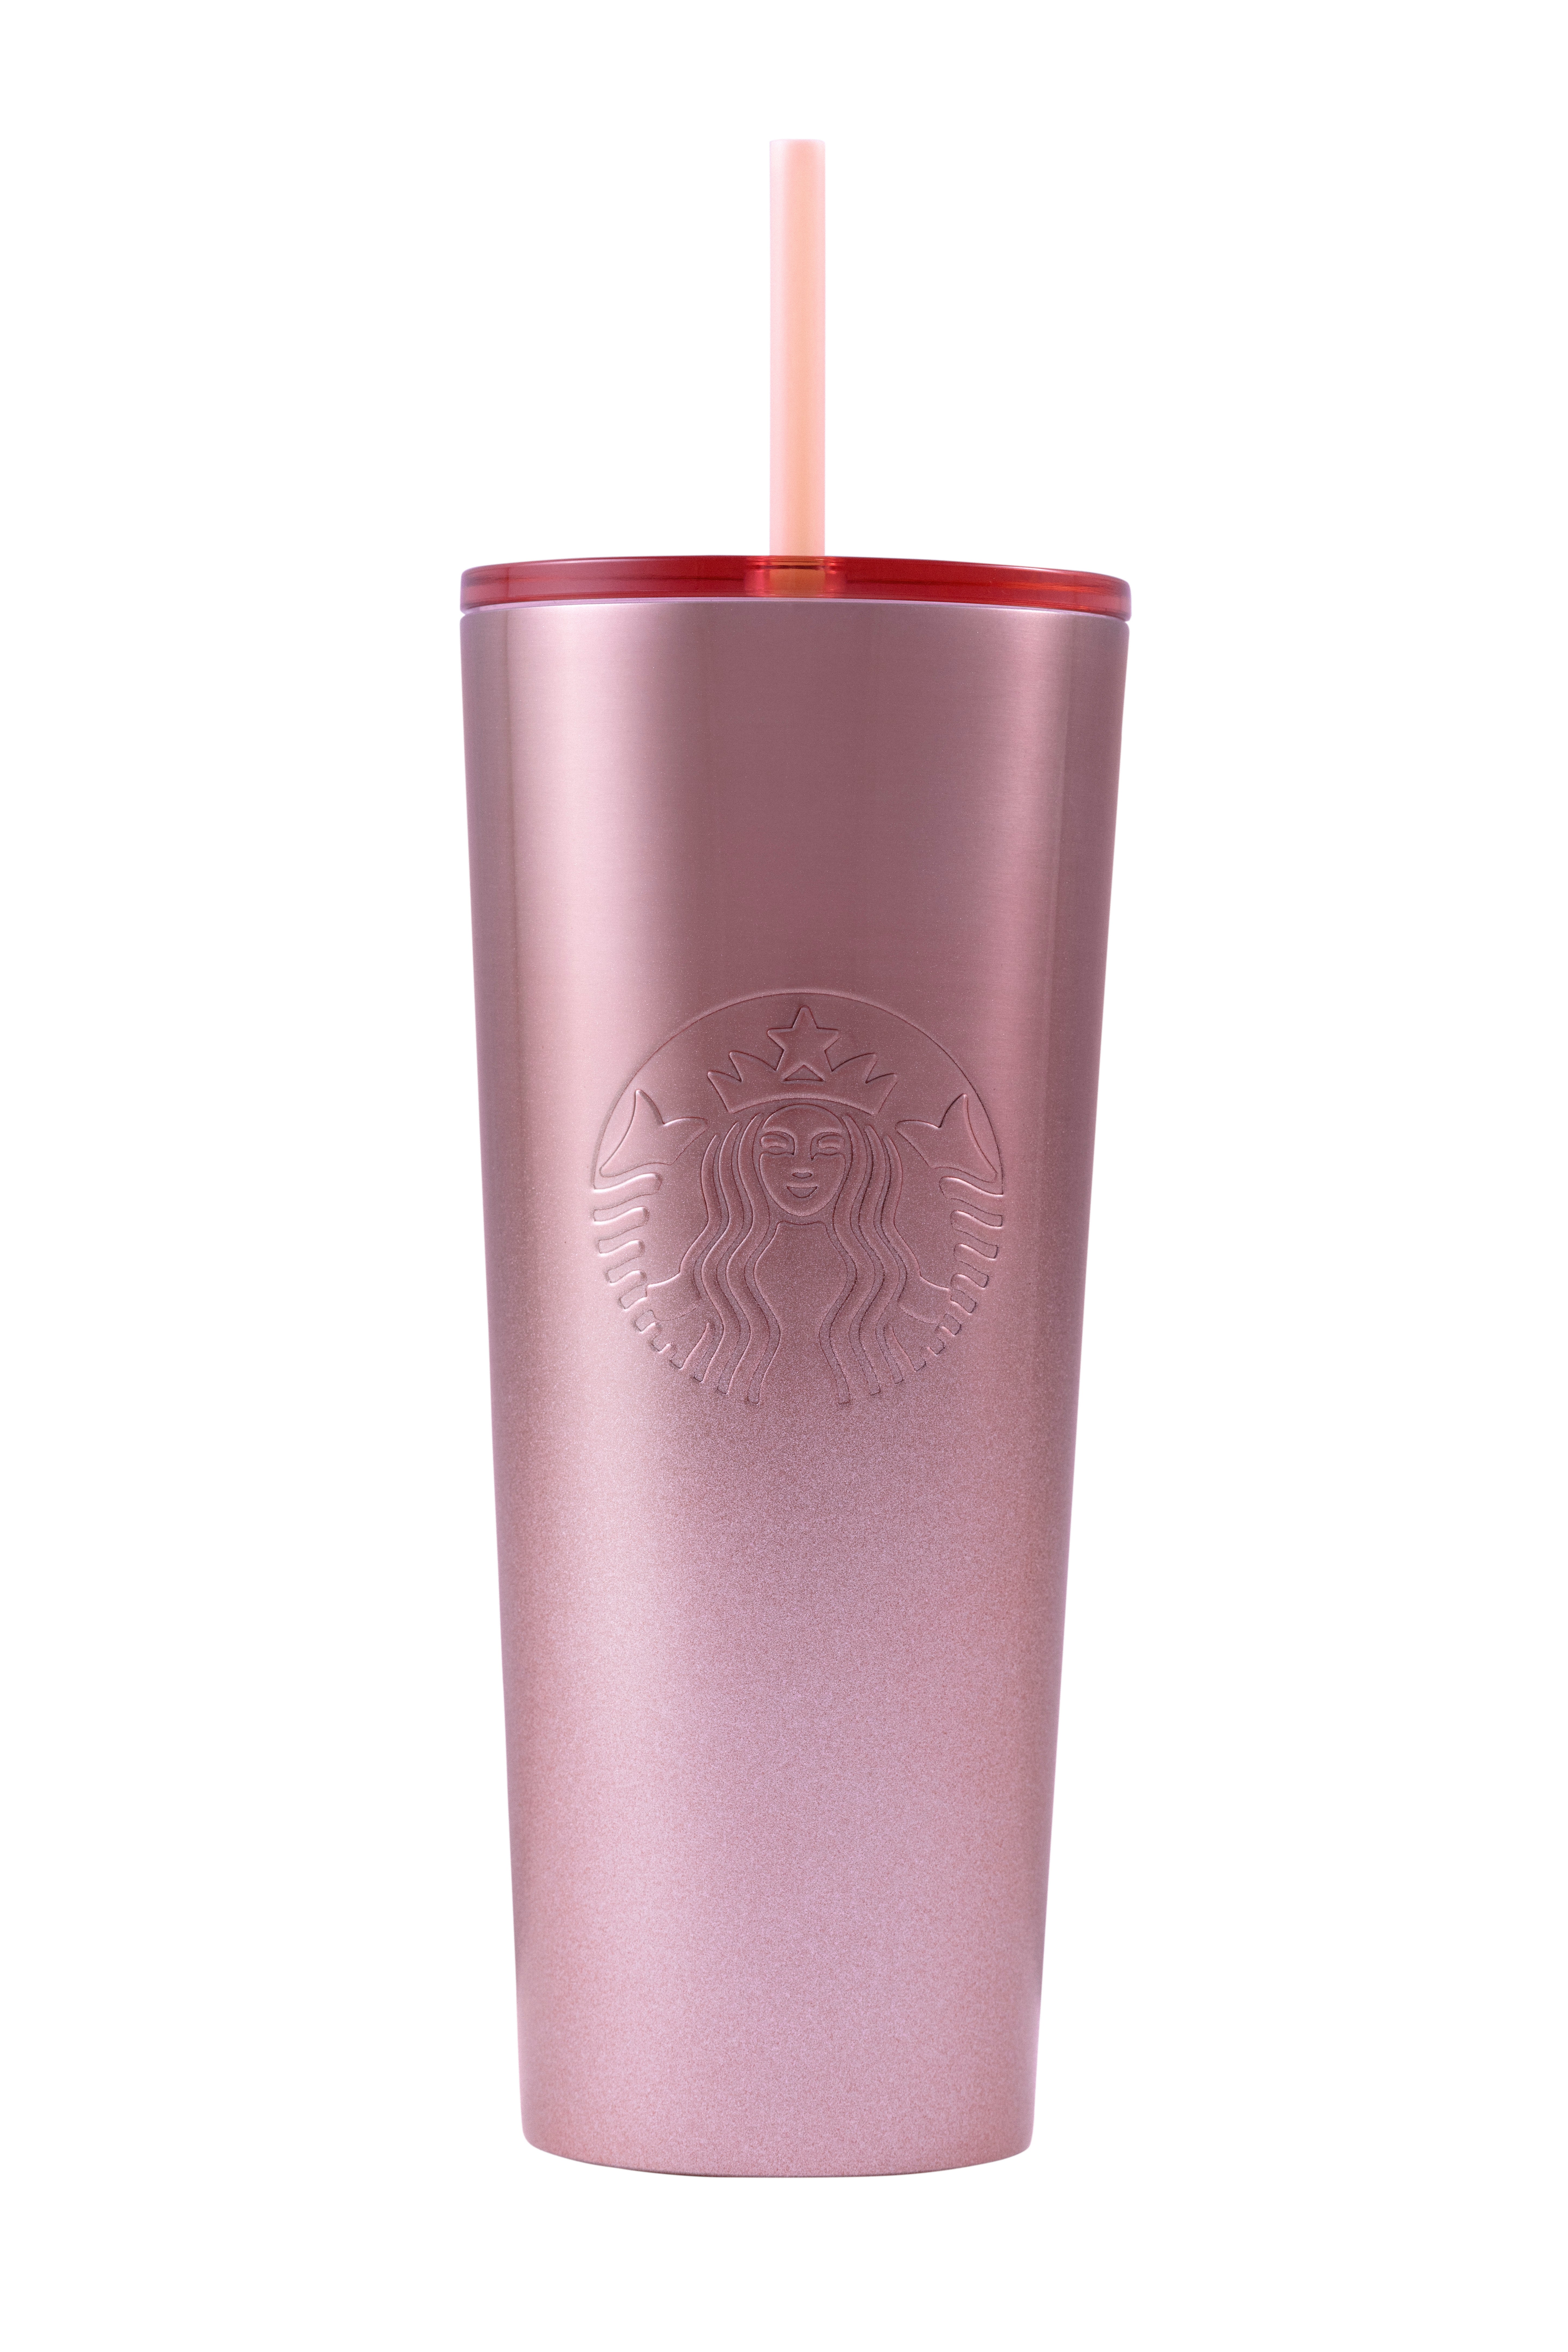 Starbucks Holiday 2019 Black Silver Foil Hot & Cold Cup Tumbler Narrow 16oz NEW 